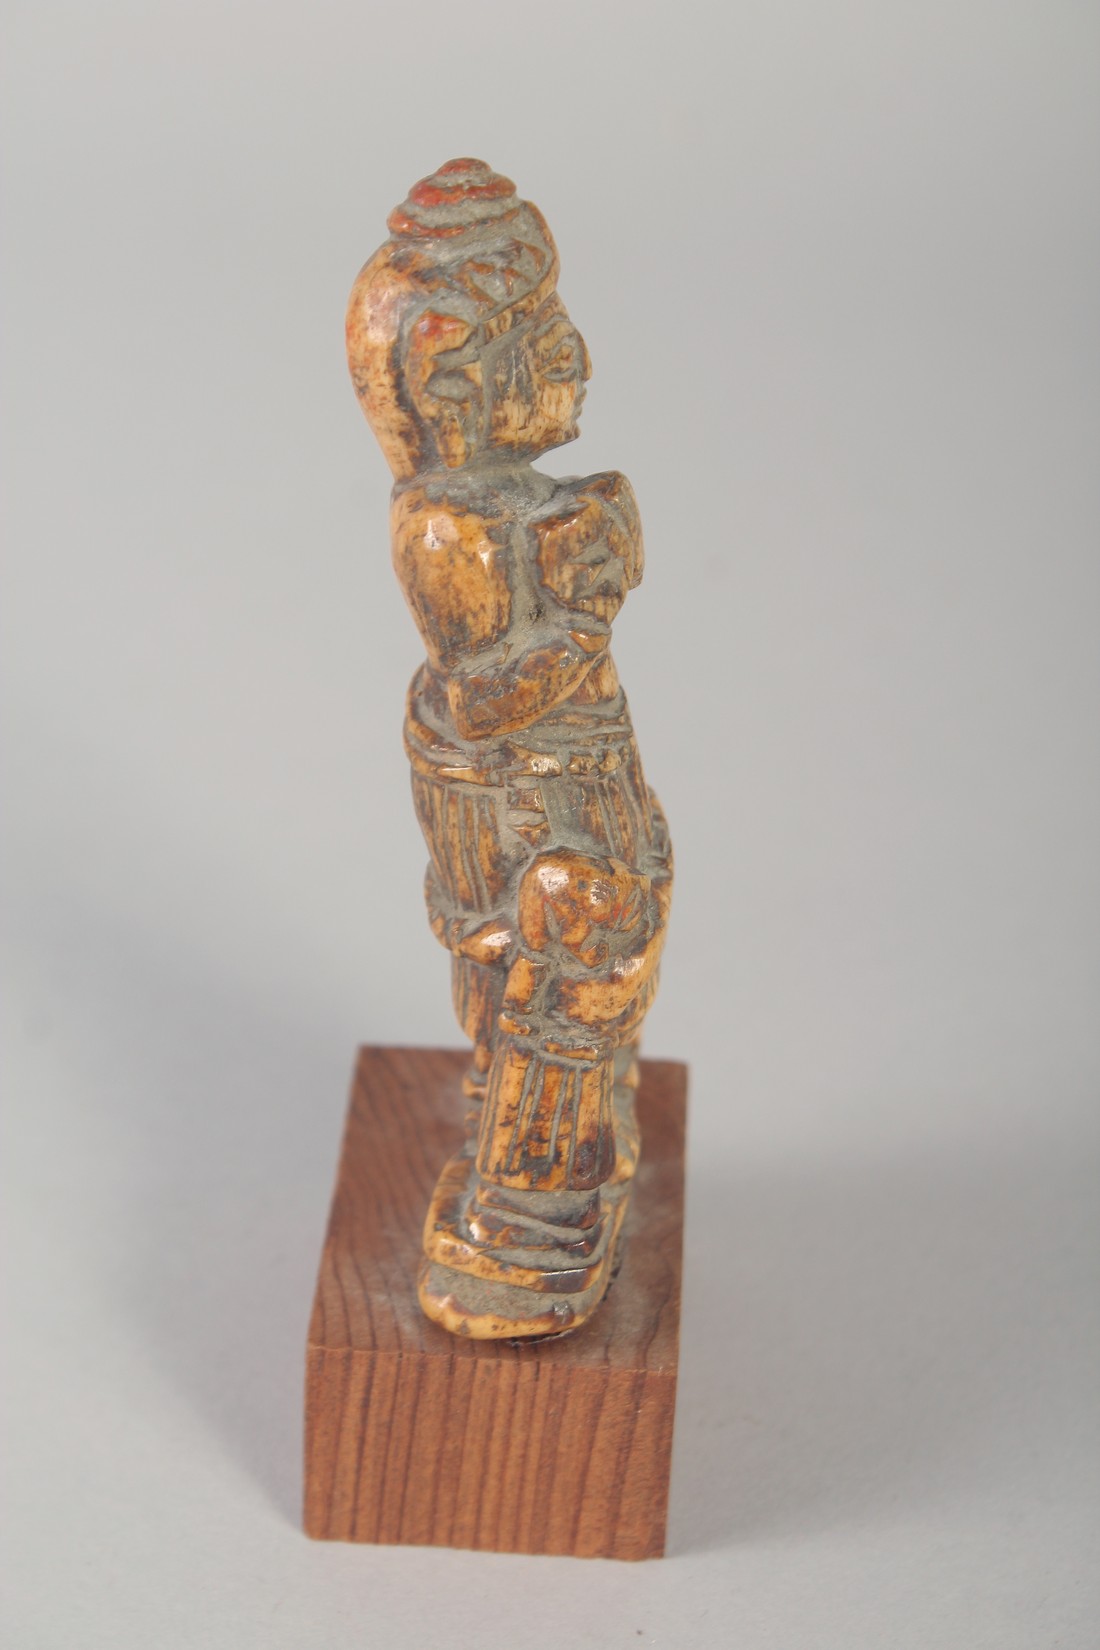 A 17TH CENTURY SOUTH INDIAN CARVED BONE FIGURE of fluting Krishna, mounted to a wooden base, carving - Image 4 of 4